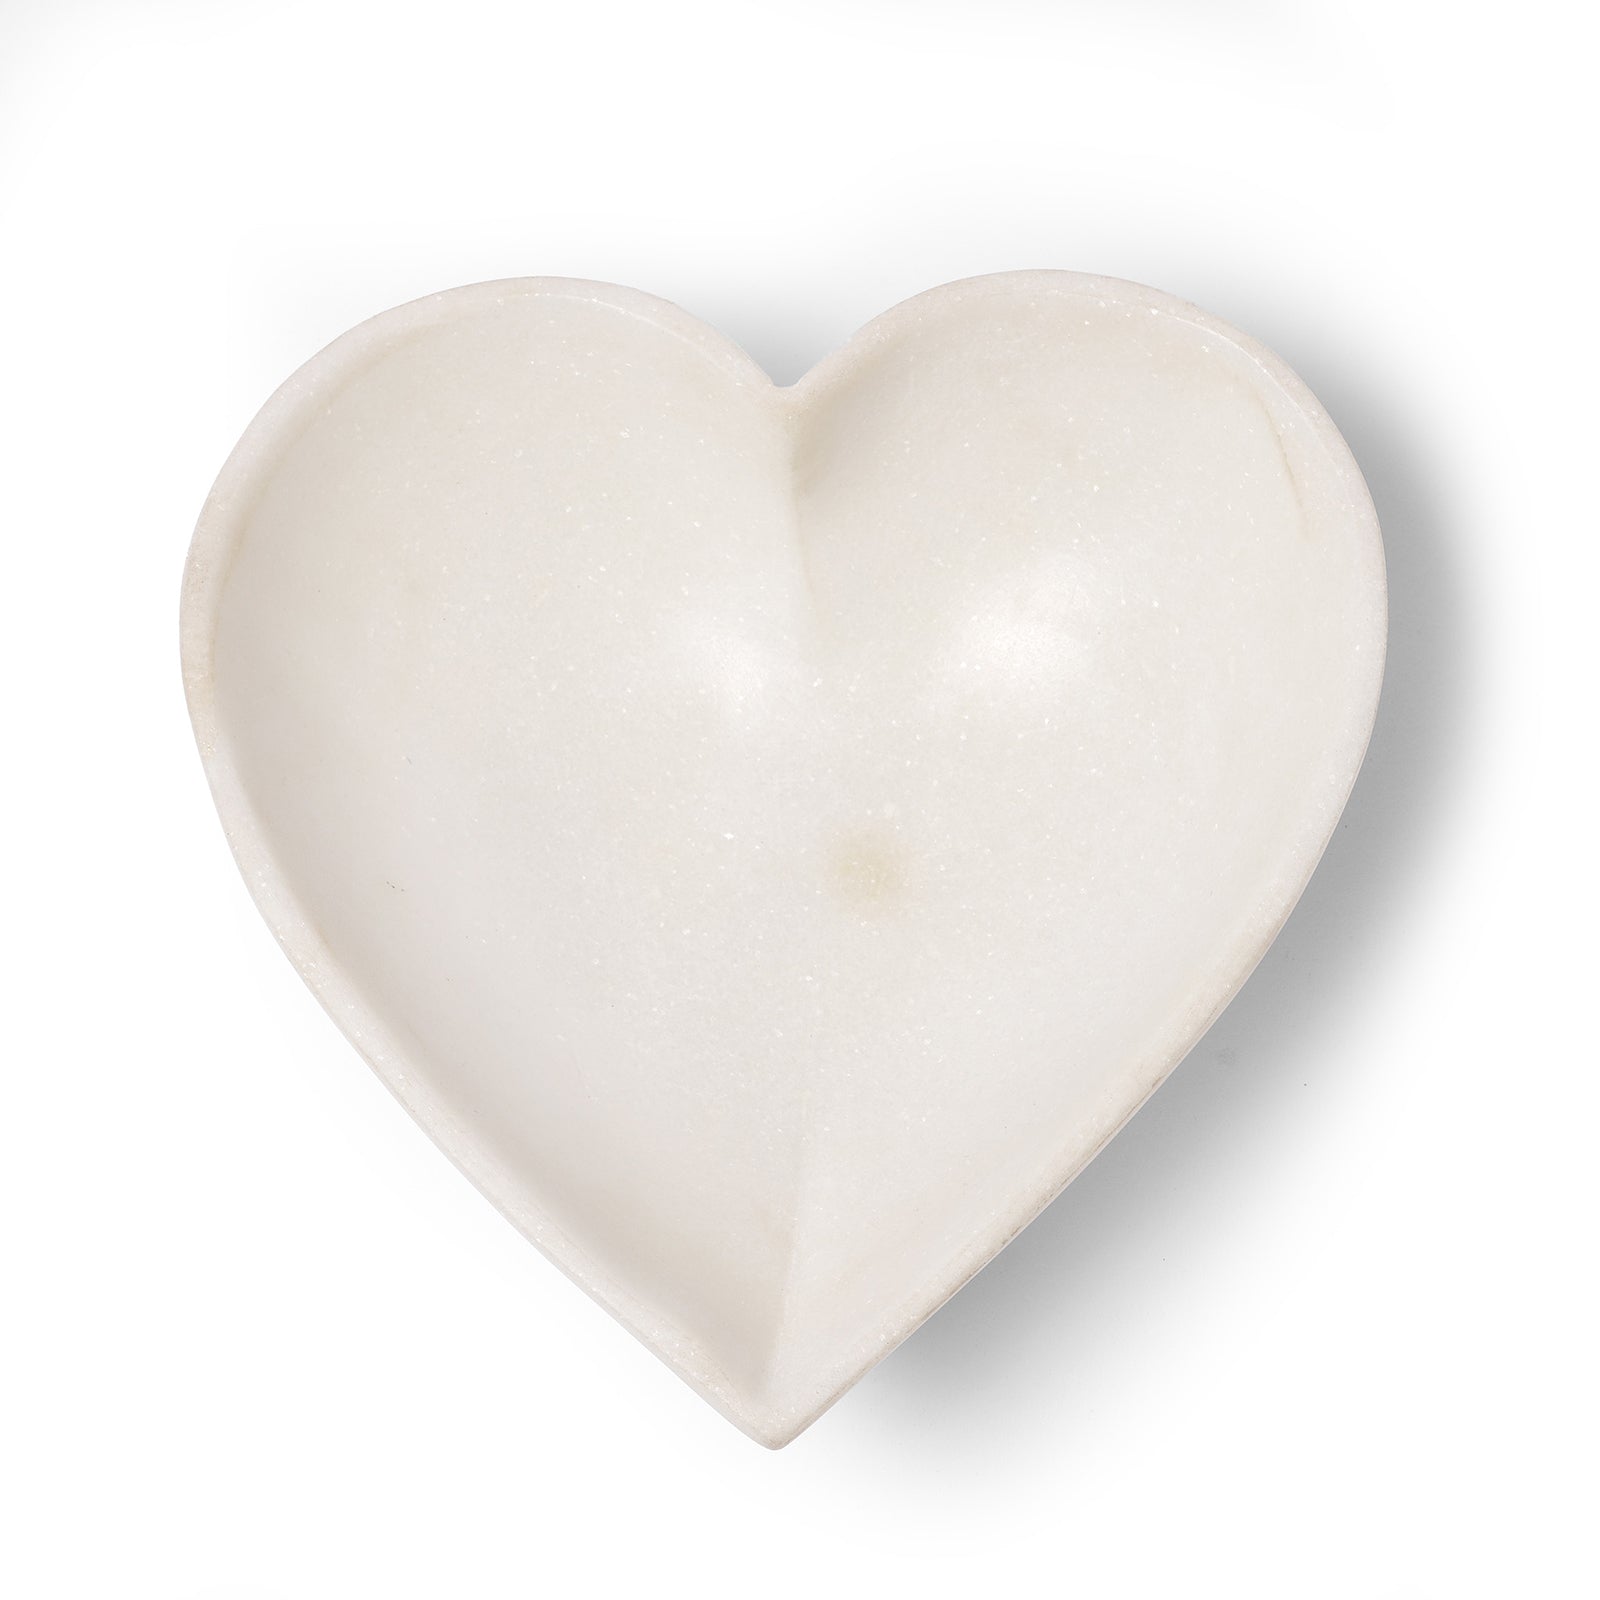 A mughal style white marble heart shaped bowl handmade in India filled with strawberries